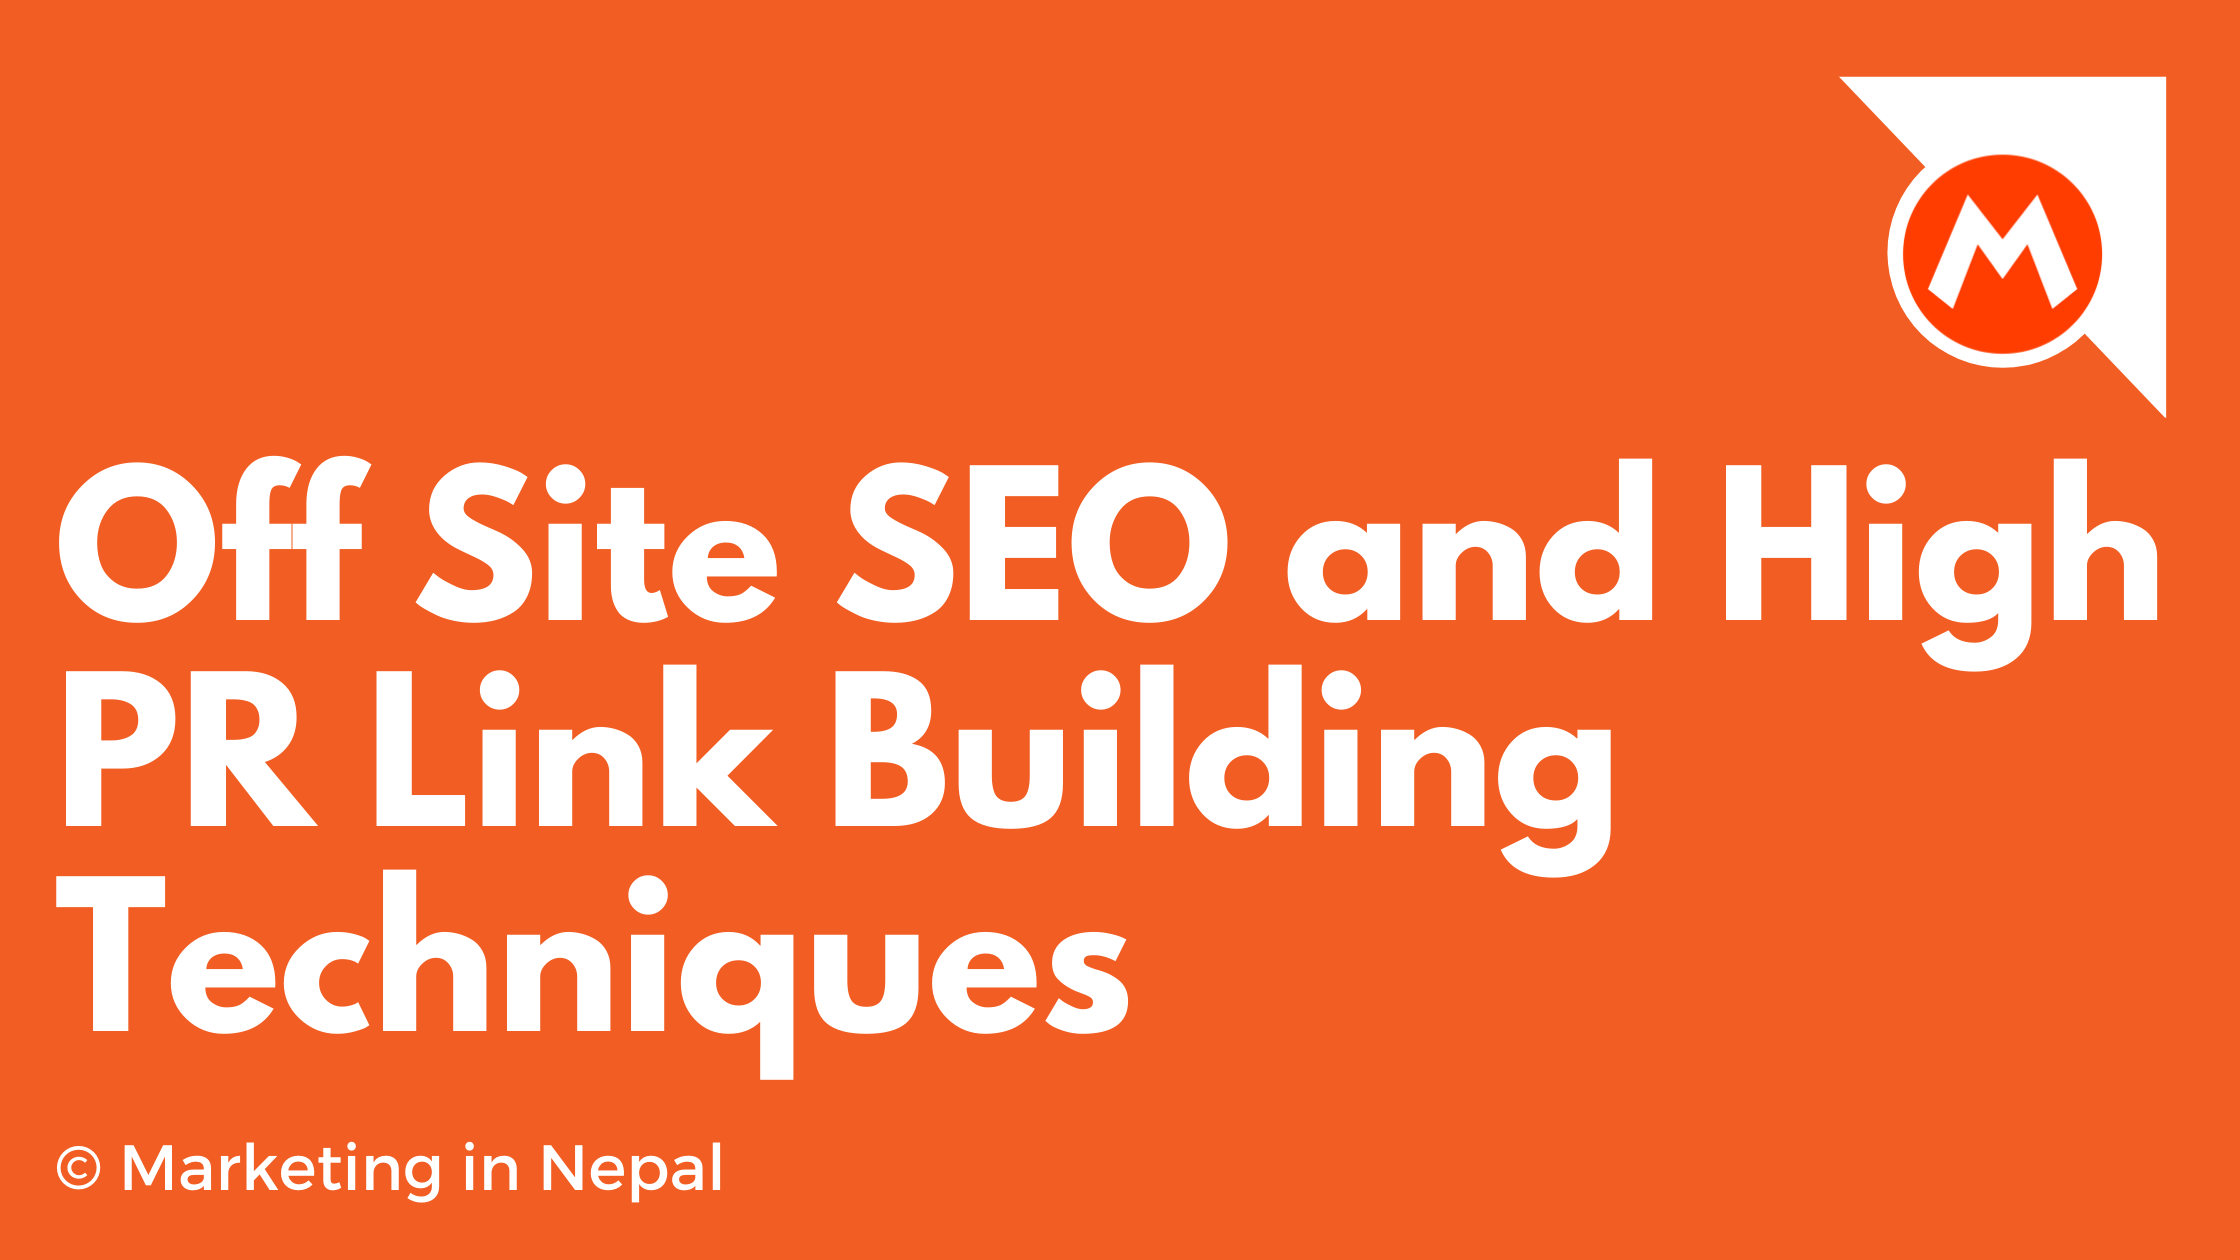 Off Site SEO and High PR Link Building Techniques